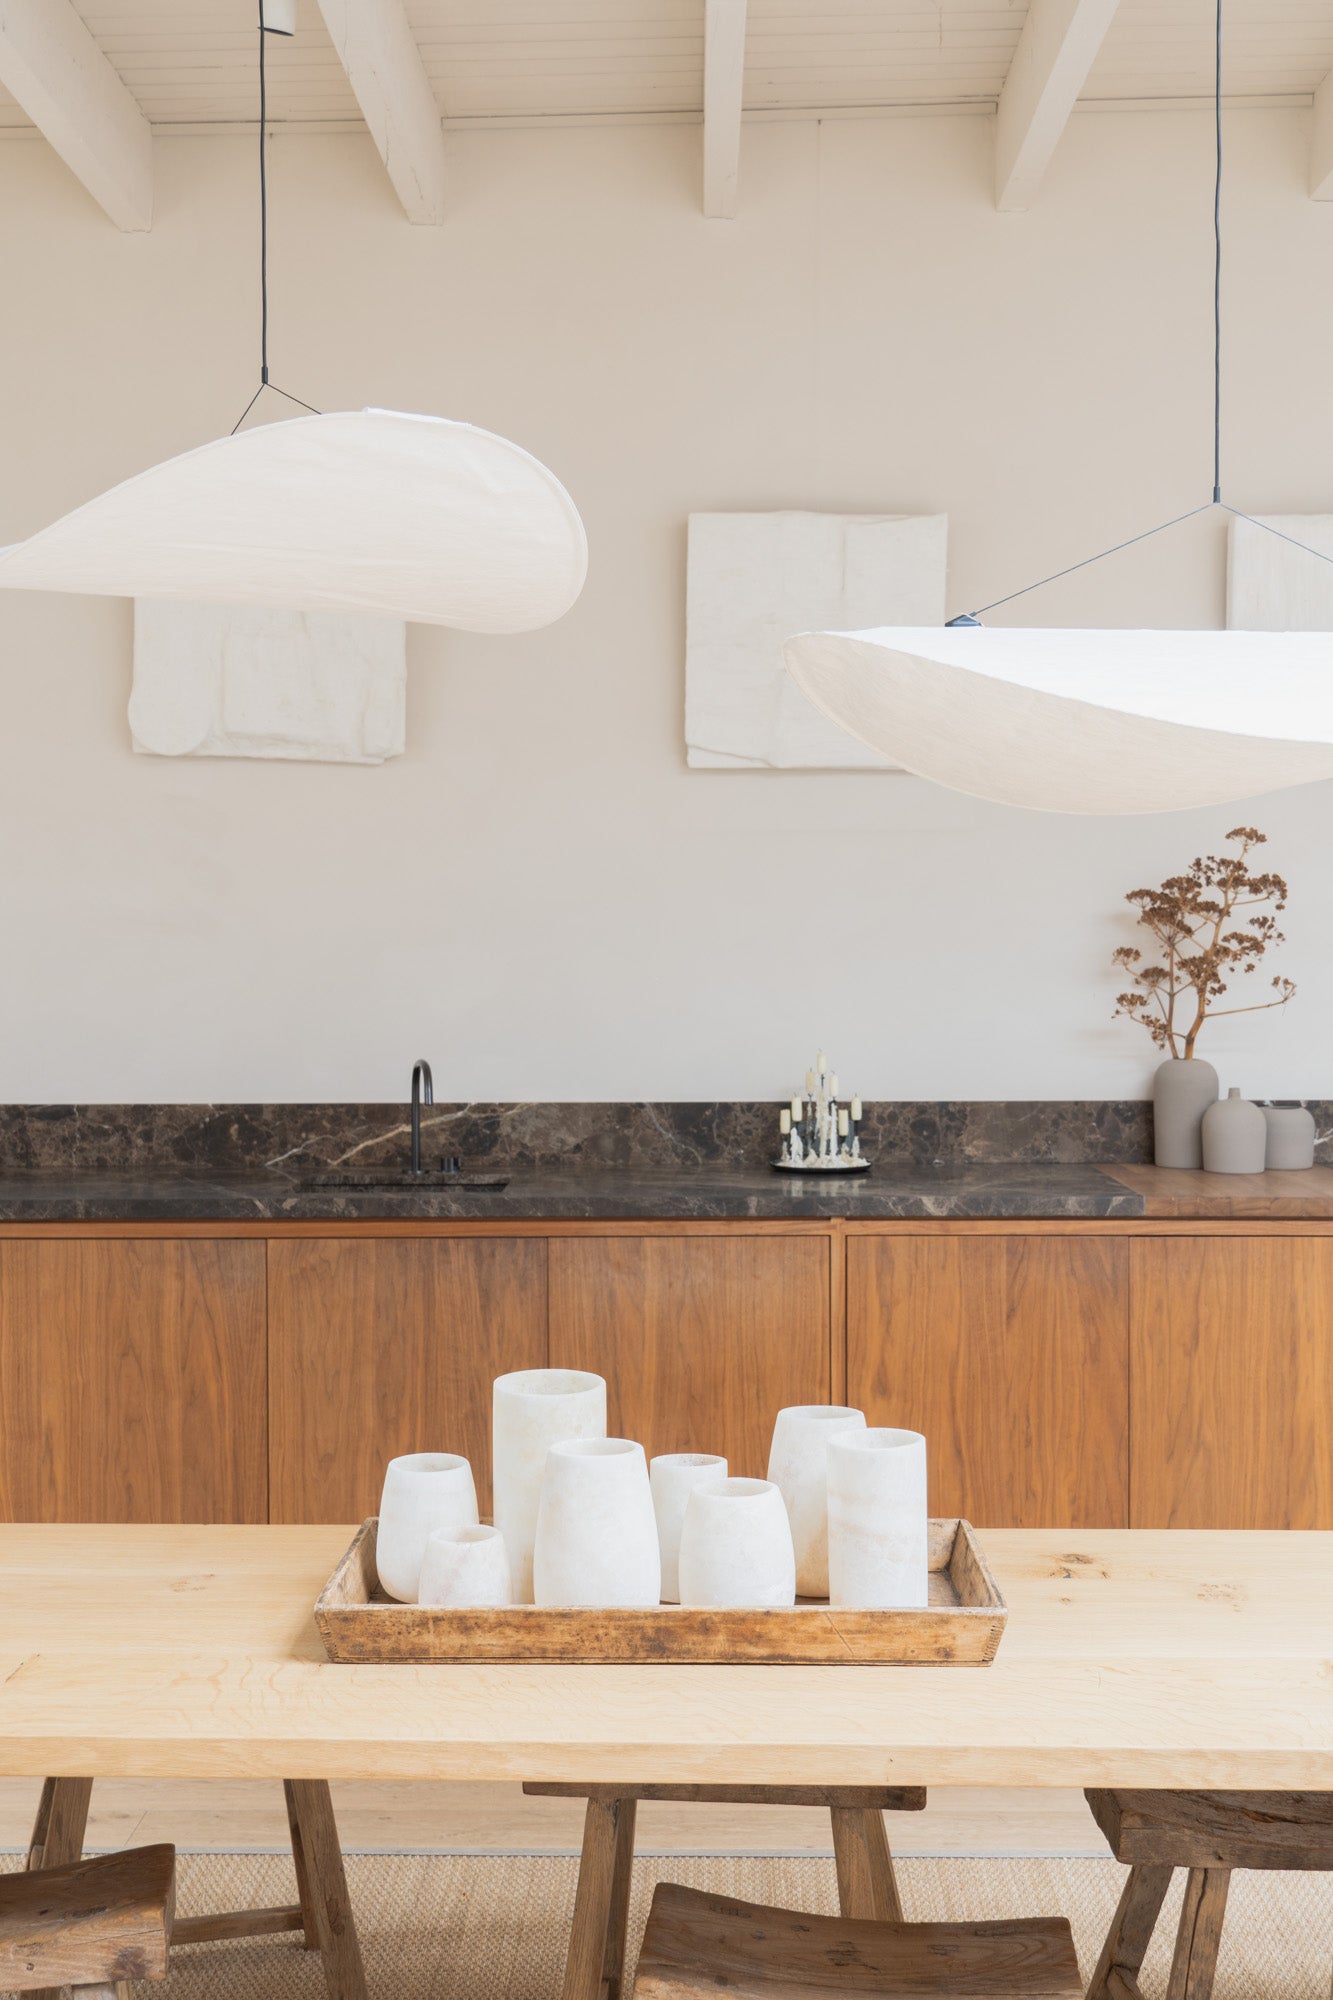 Light kitchen interior at Enter The Loft with multiple different sized Alabaster Tealights set on a wooden tray on the dining table.